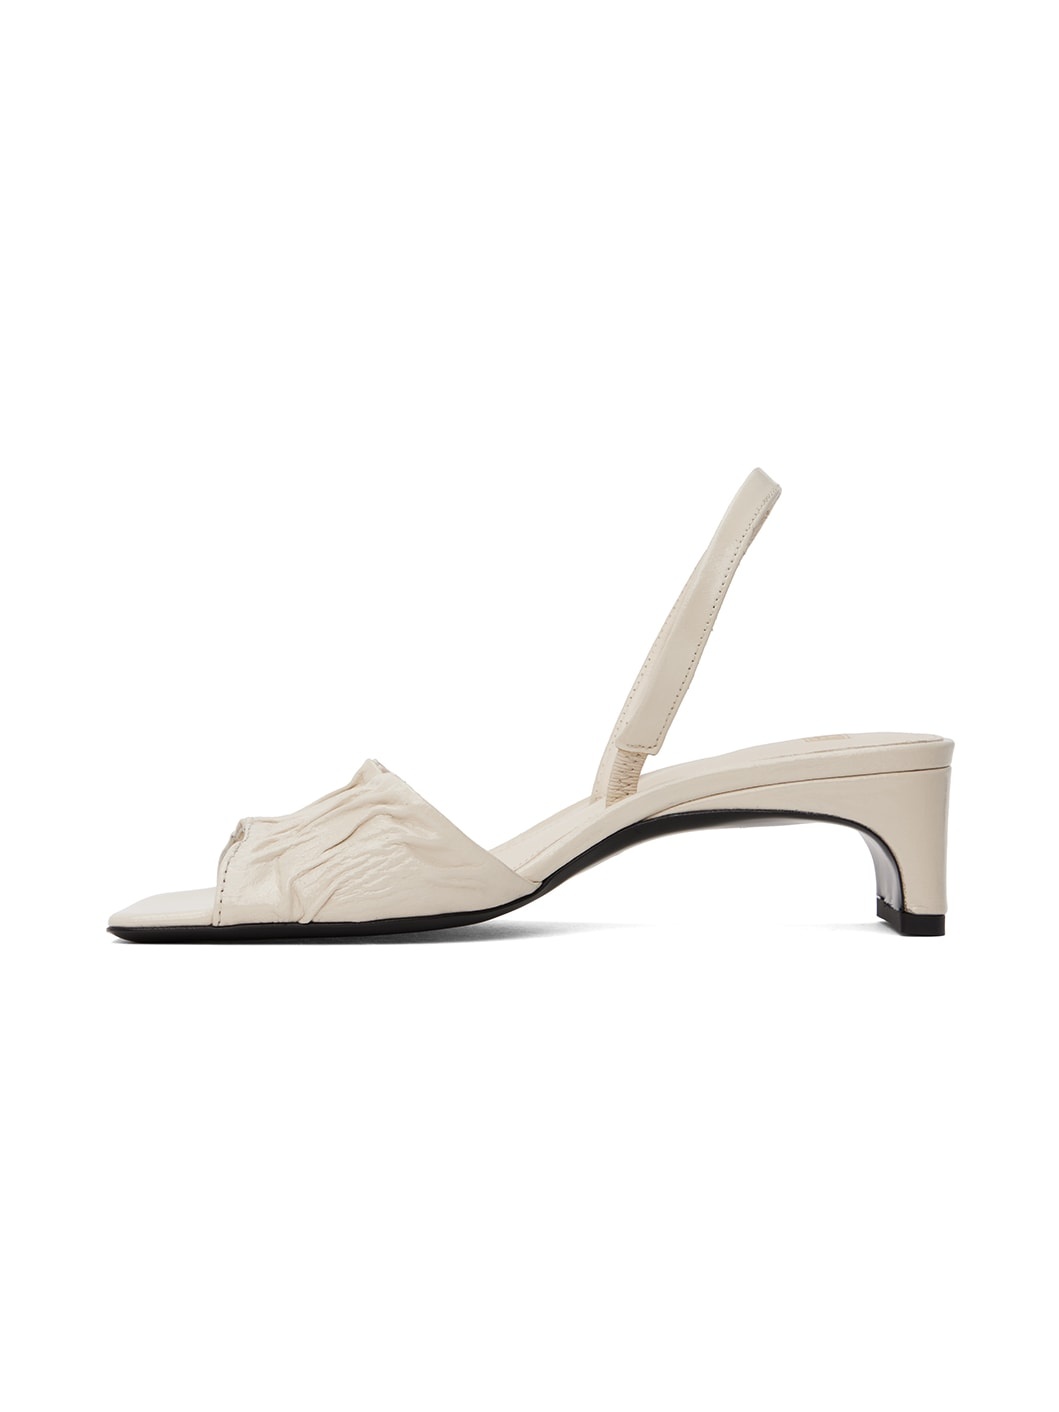 Off-White 'The Gathered Scoop' Heeled Sandals - 3